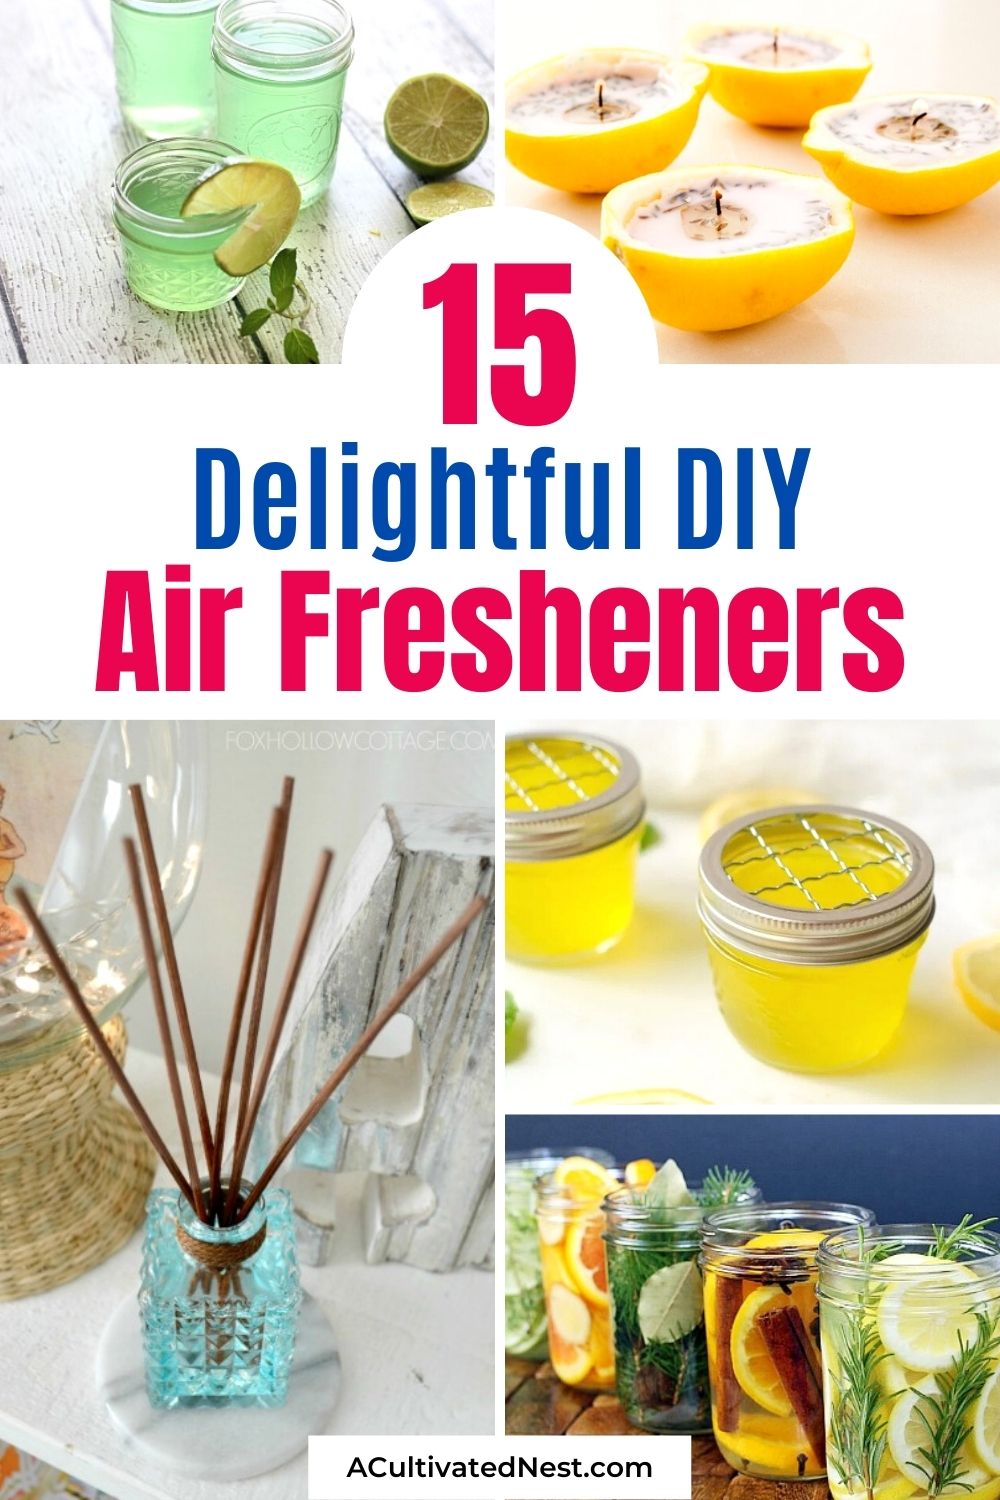 15 DIY Air Fresheners to Make Your Home Smell Good